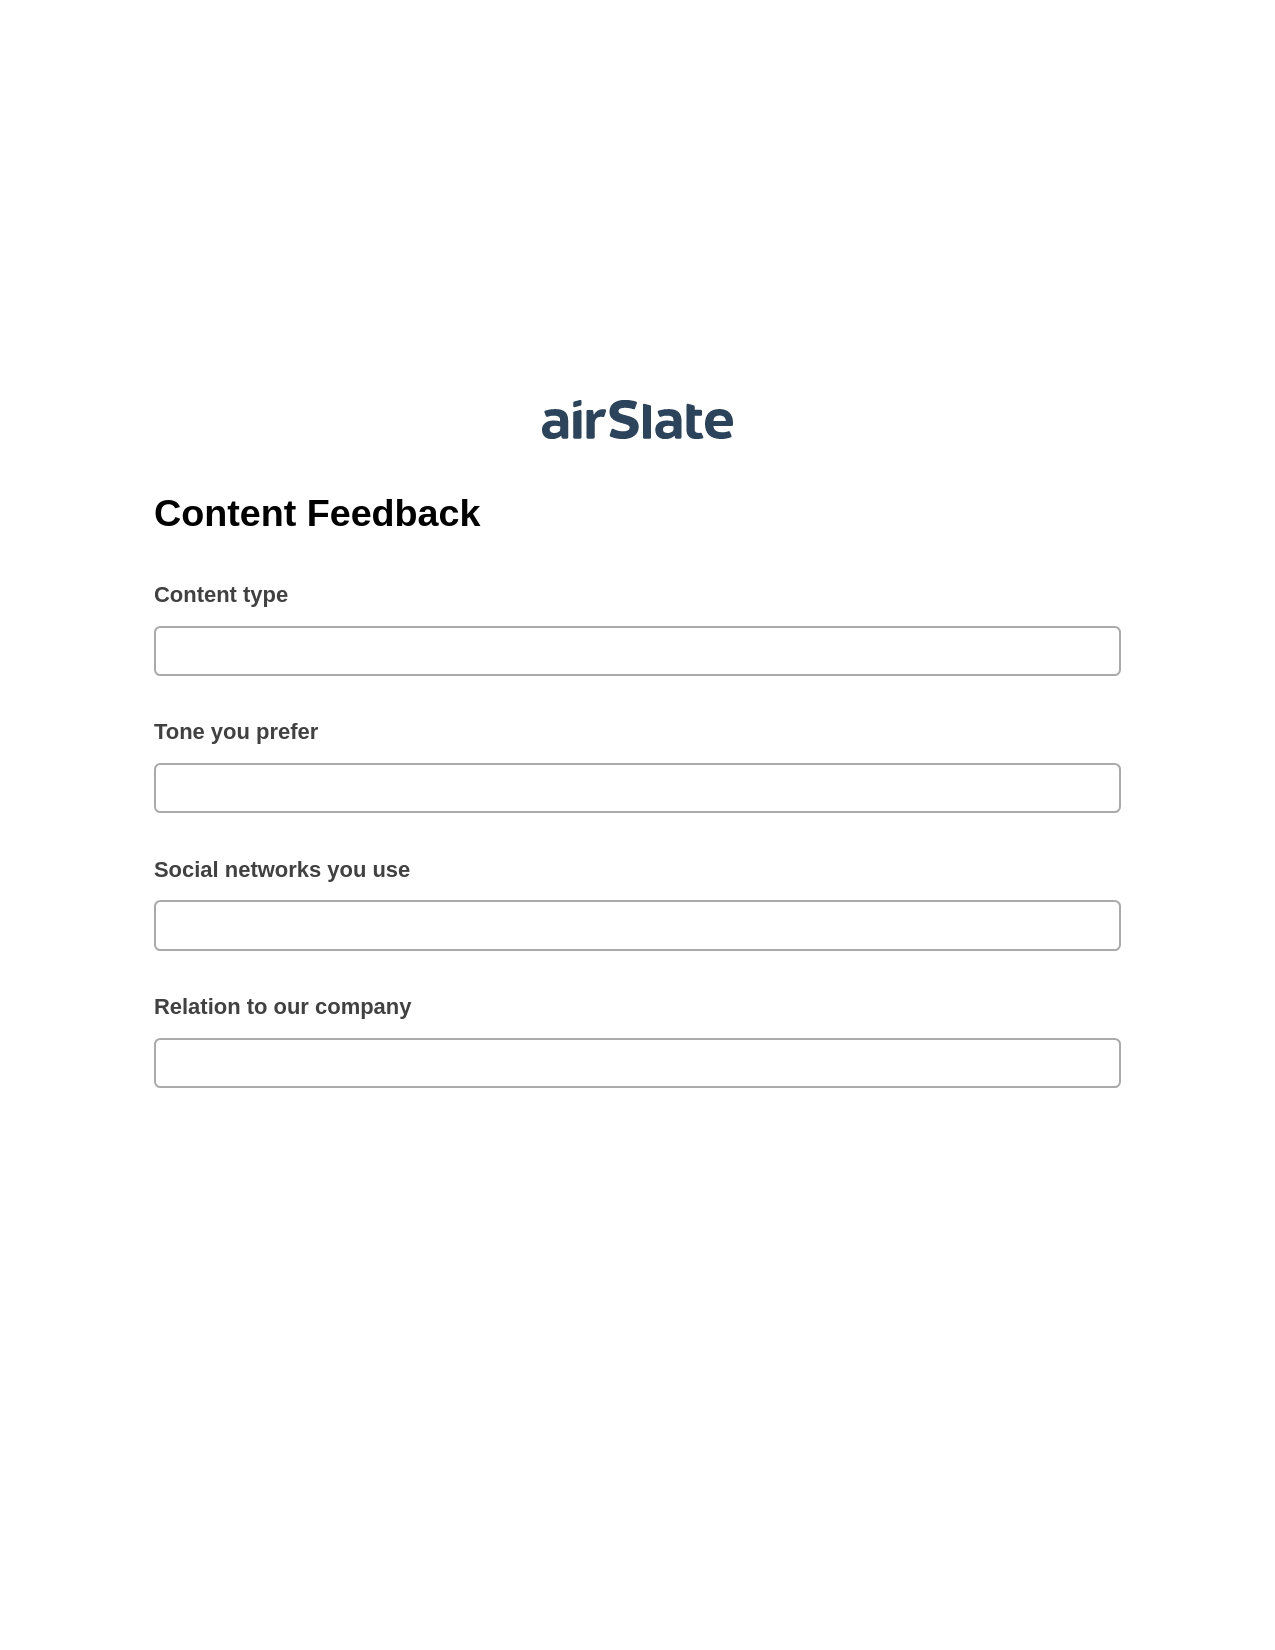 Content Feedback Pre-fill from MySQL Bot, Lock the slate bot, Archive to SharePoint Folder Bot